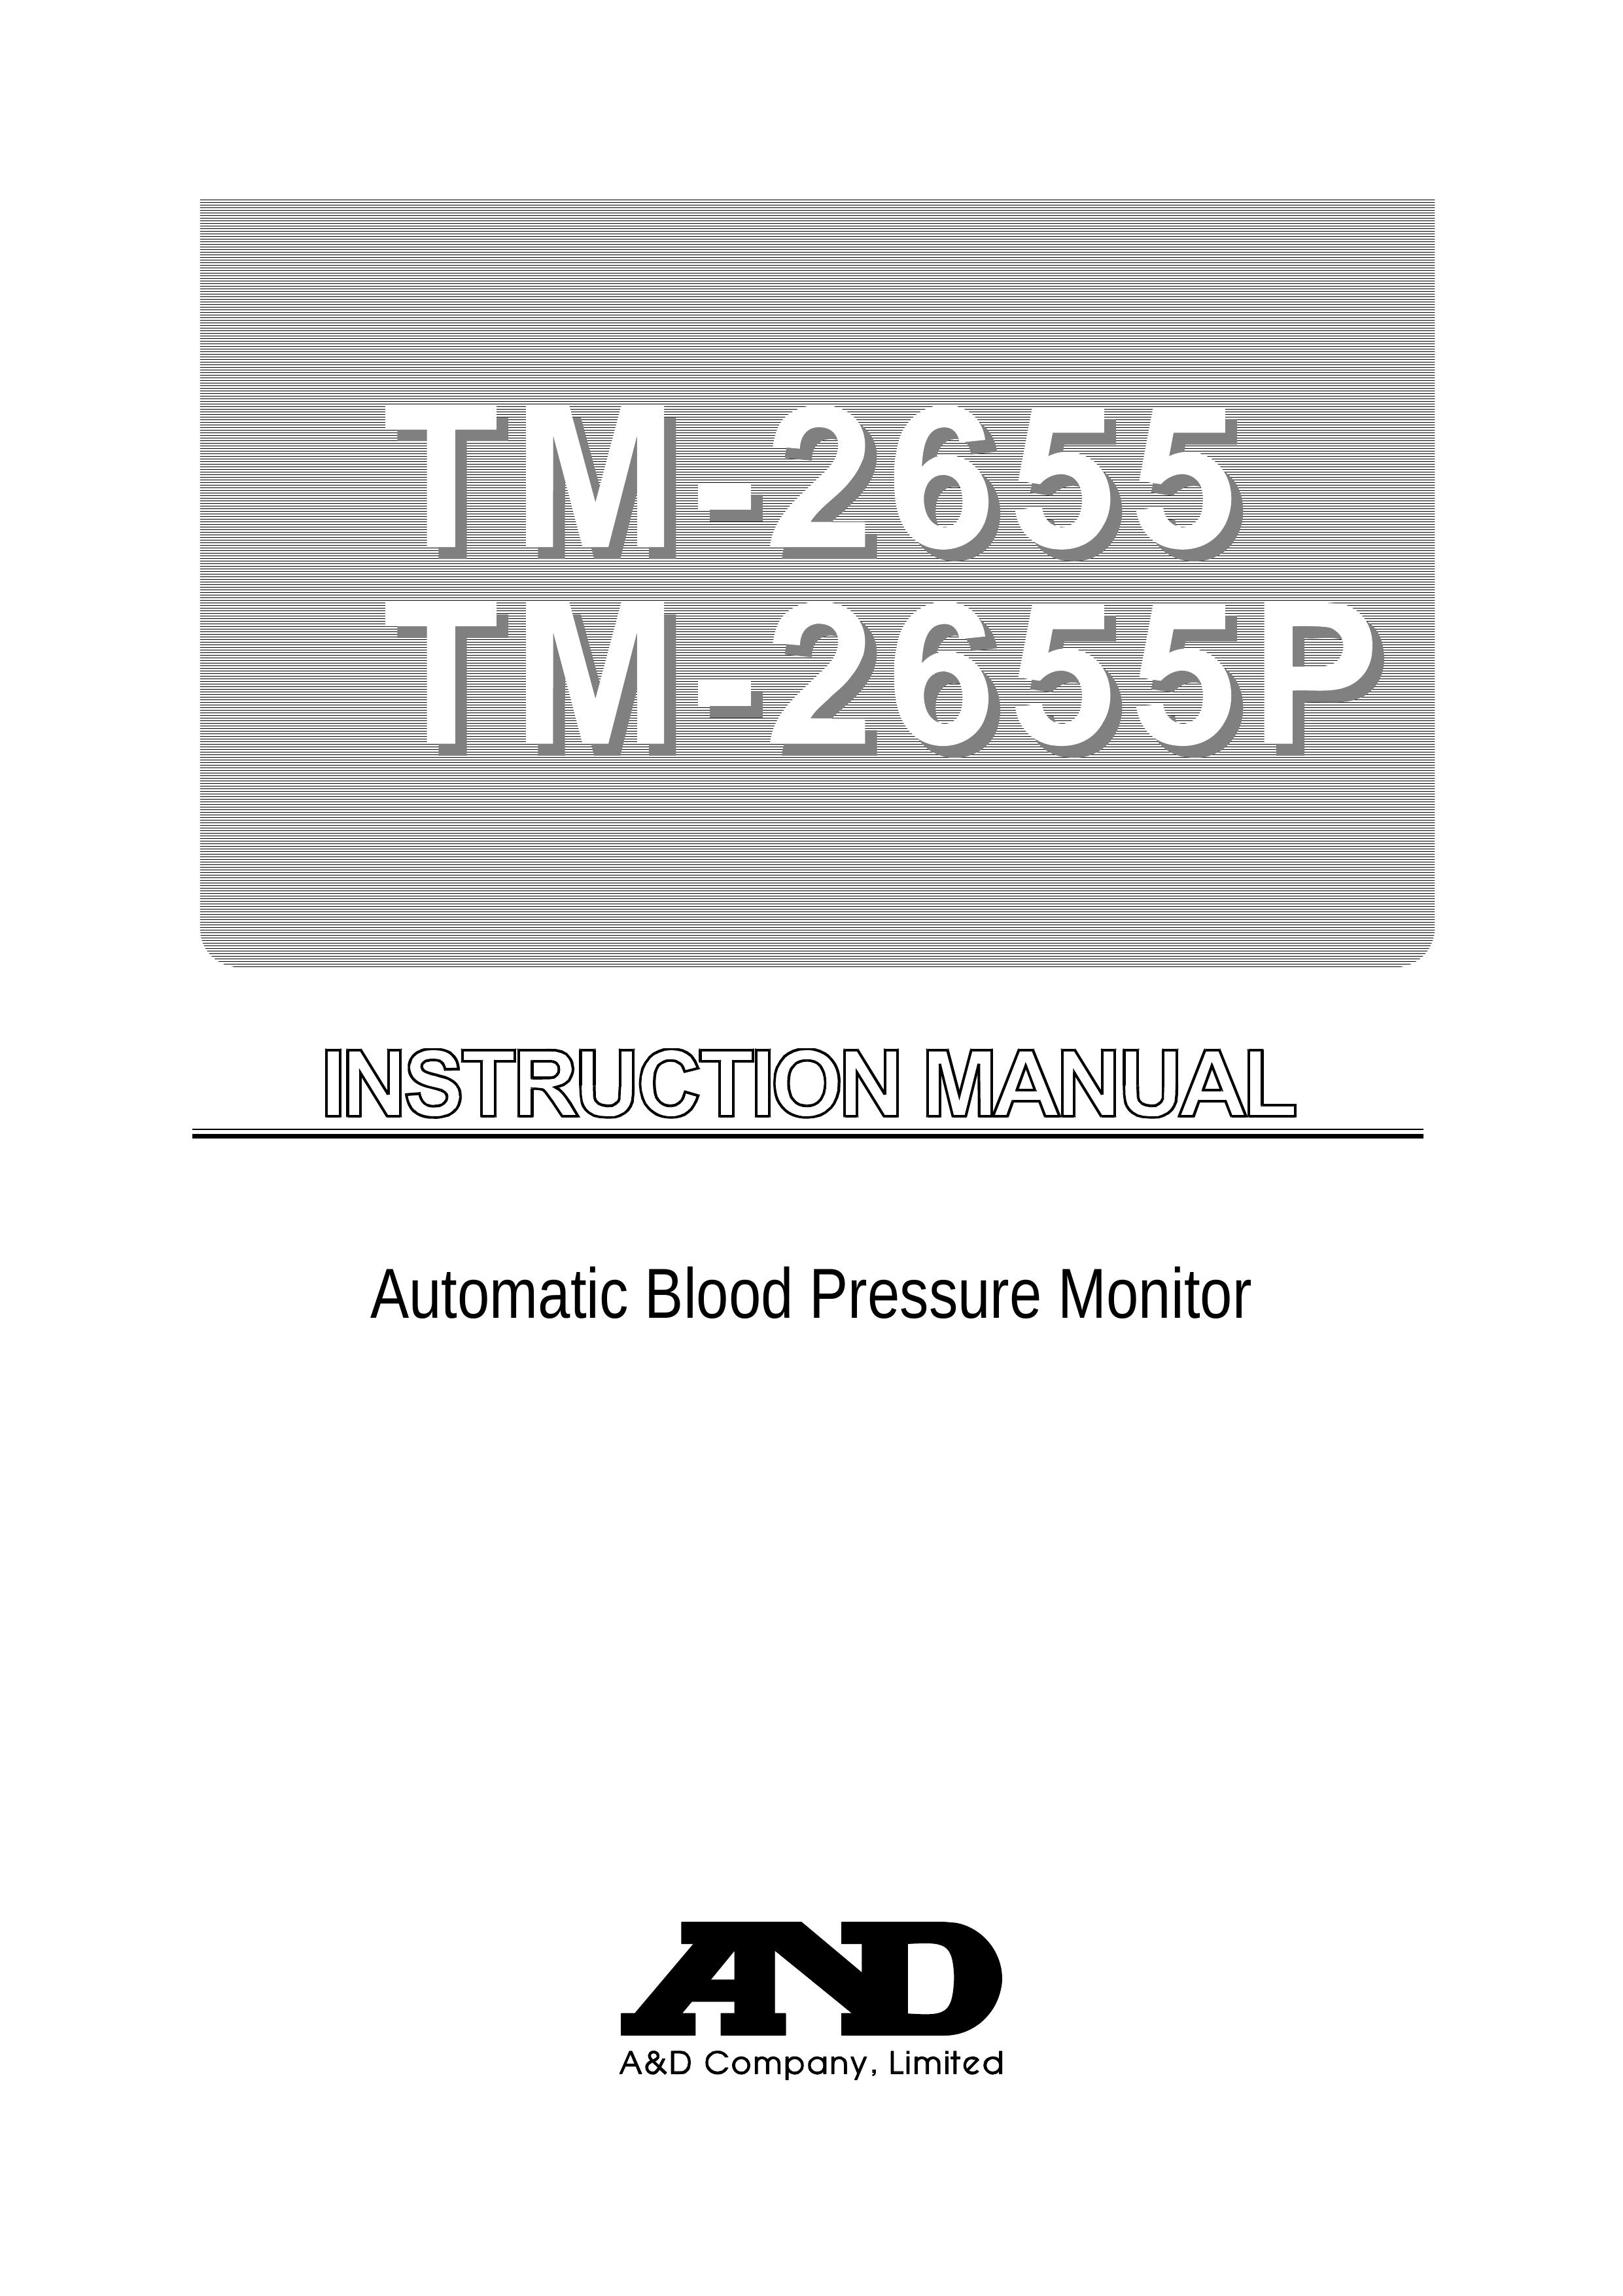 A&D TM-2655P Blood Pressure Monitor User Manual (Page 1)